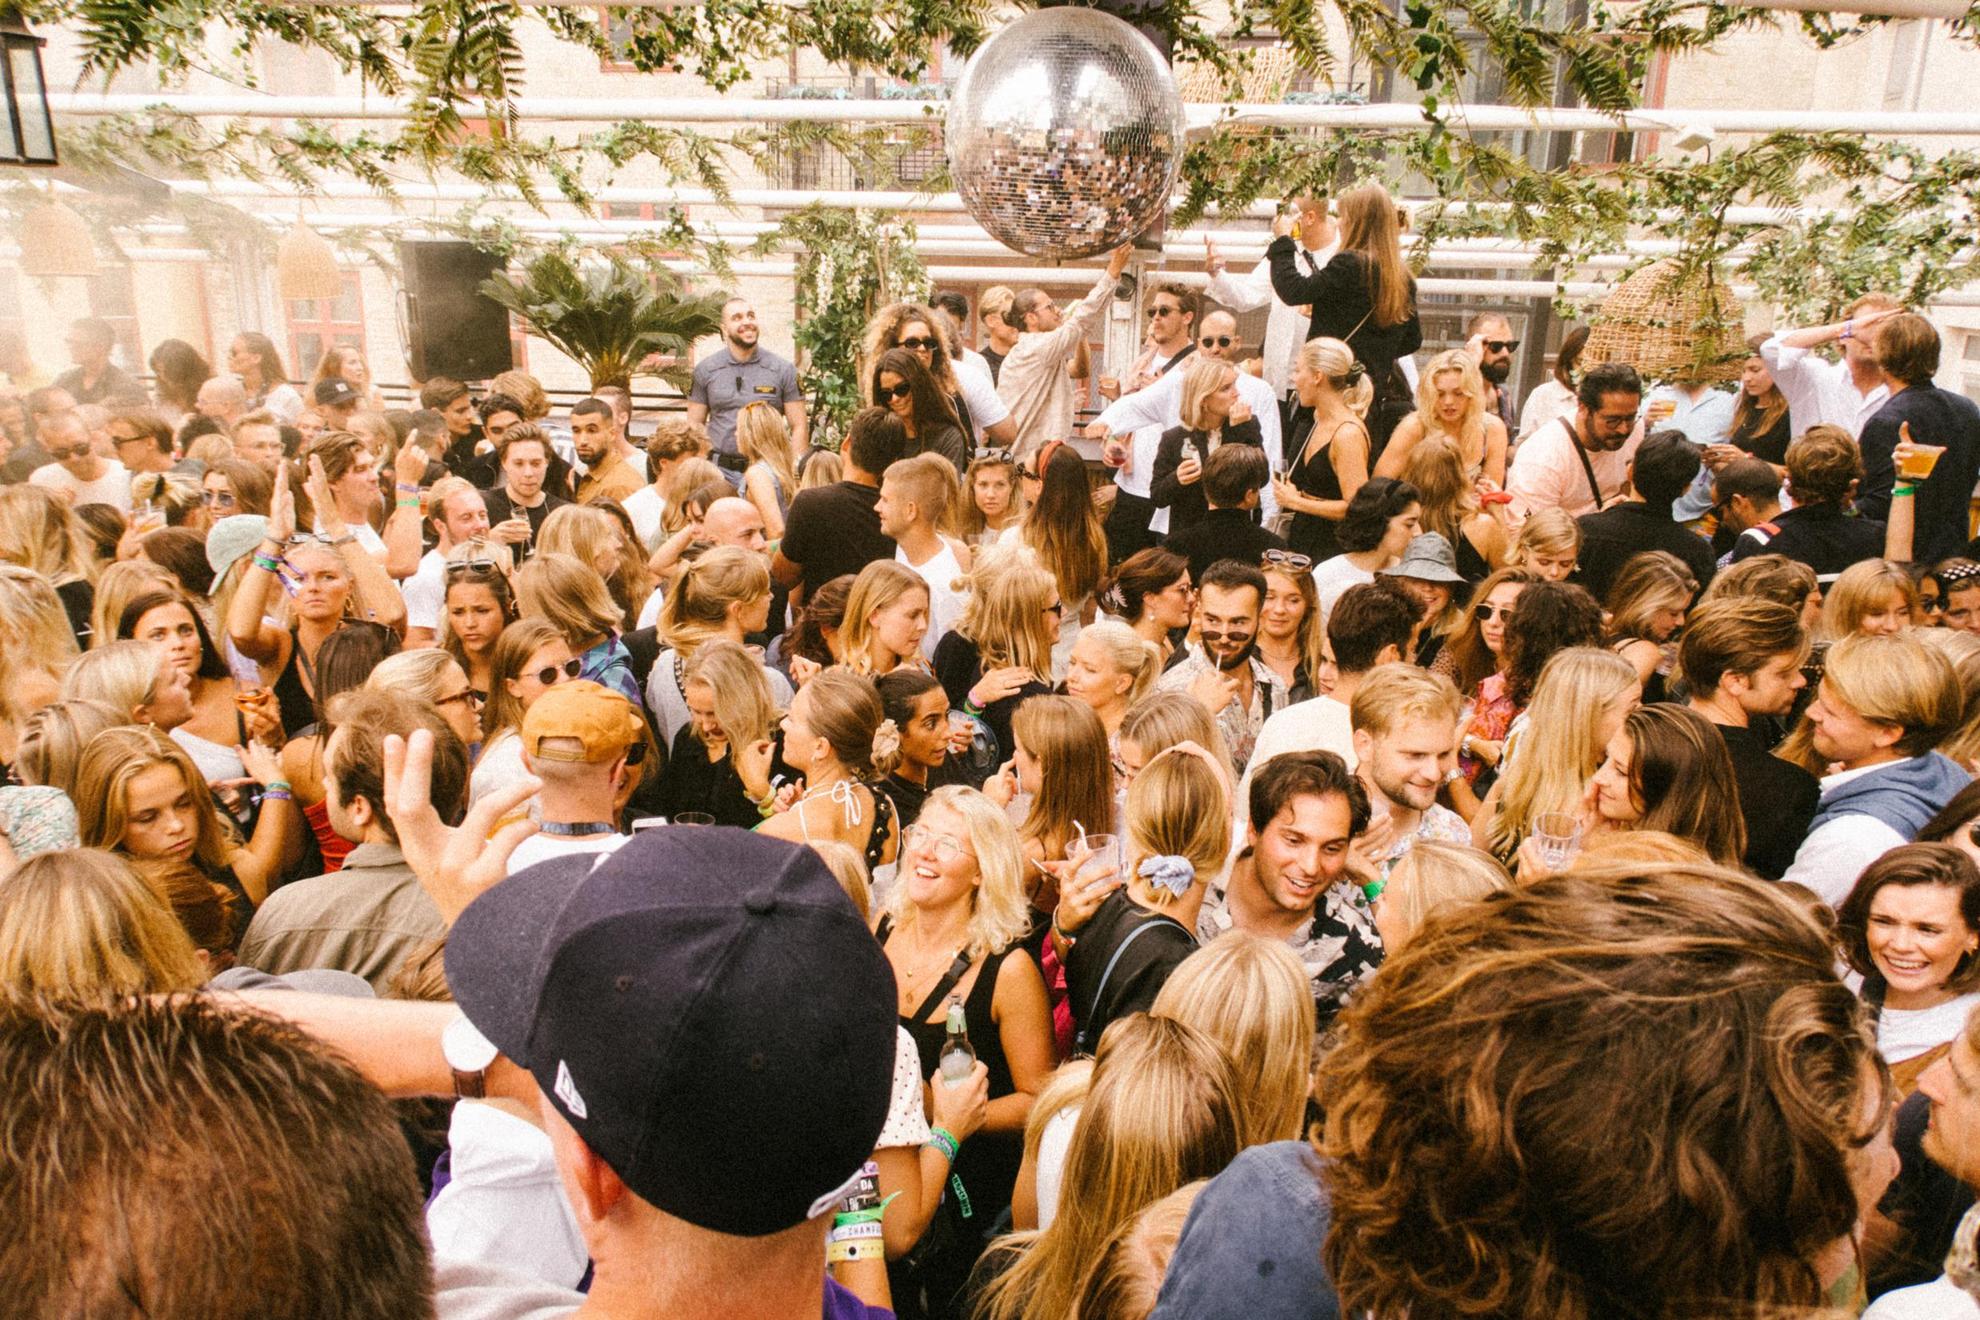 People dancing at a rooftop club during the summer.